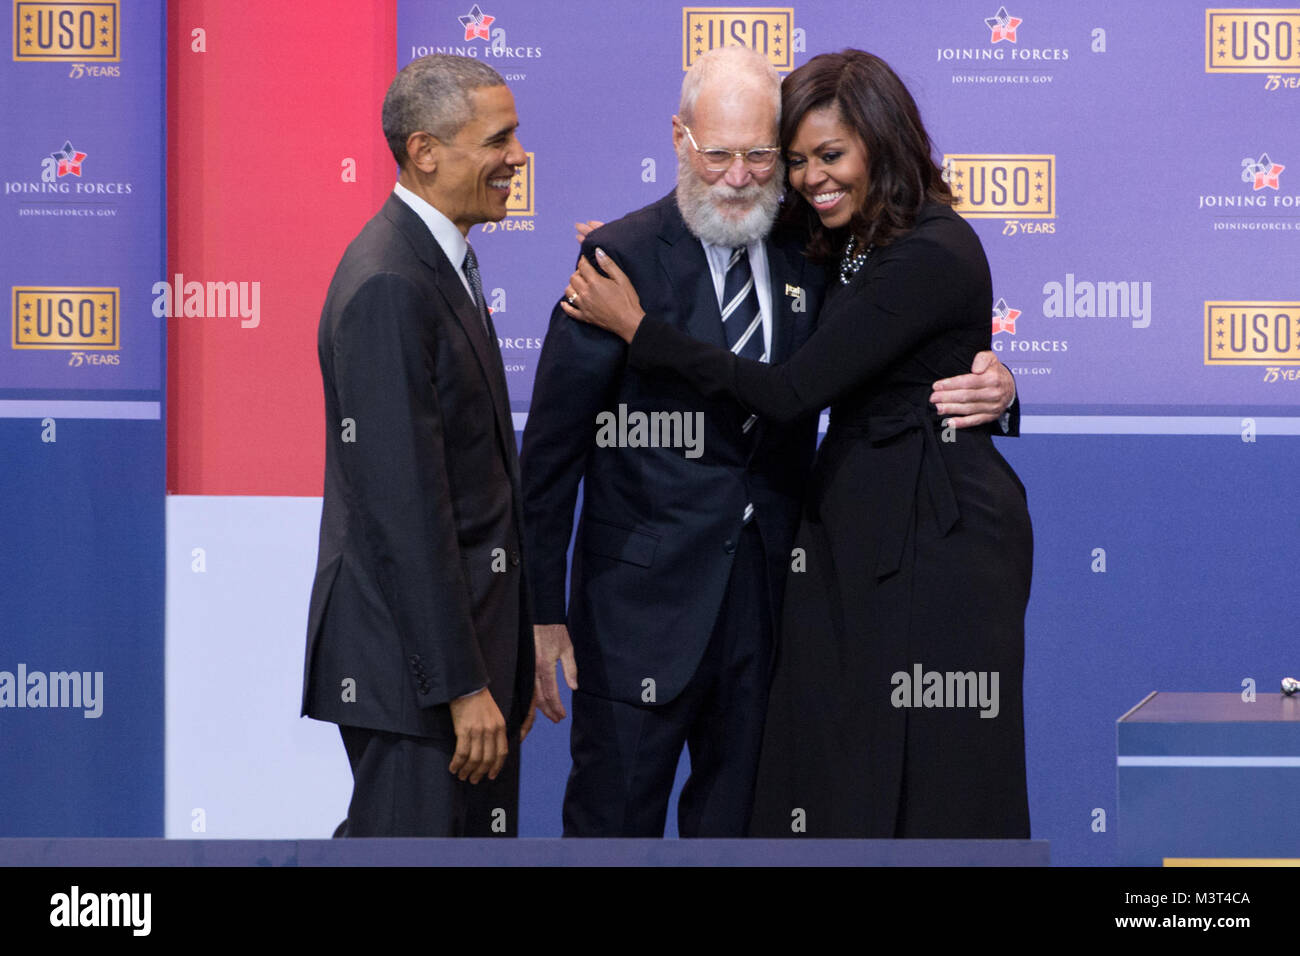 First Lady Michelle Obama hugs former Late Show Host David Letterman as President Barack Obama looks on during the comedy show in celebration of the 75th anniversary of the USO and the 5th anniversary of Joining Forces at Joint Base Andrews in Washington, D.C. May 5, 2016. Joining Forces is an initiative to help military, veterans and their families founded by Dr. Jill Biden and First Lady Michelle Obama. (DoD News photo by EJ Hersom) 160505-D-DB155-003 by DoD News Photos Stock Photo